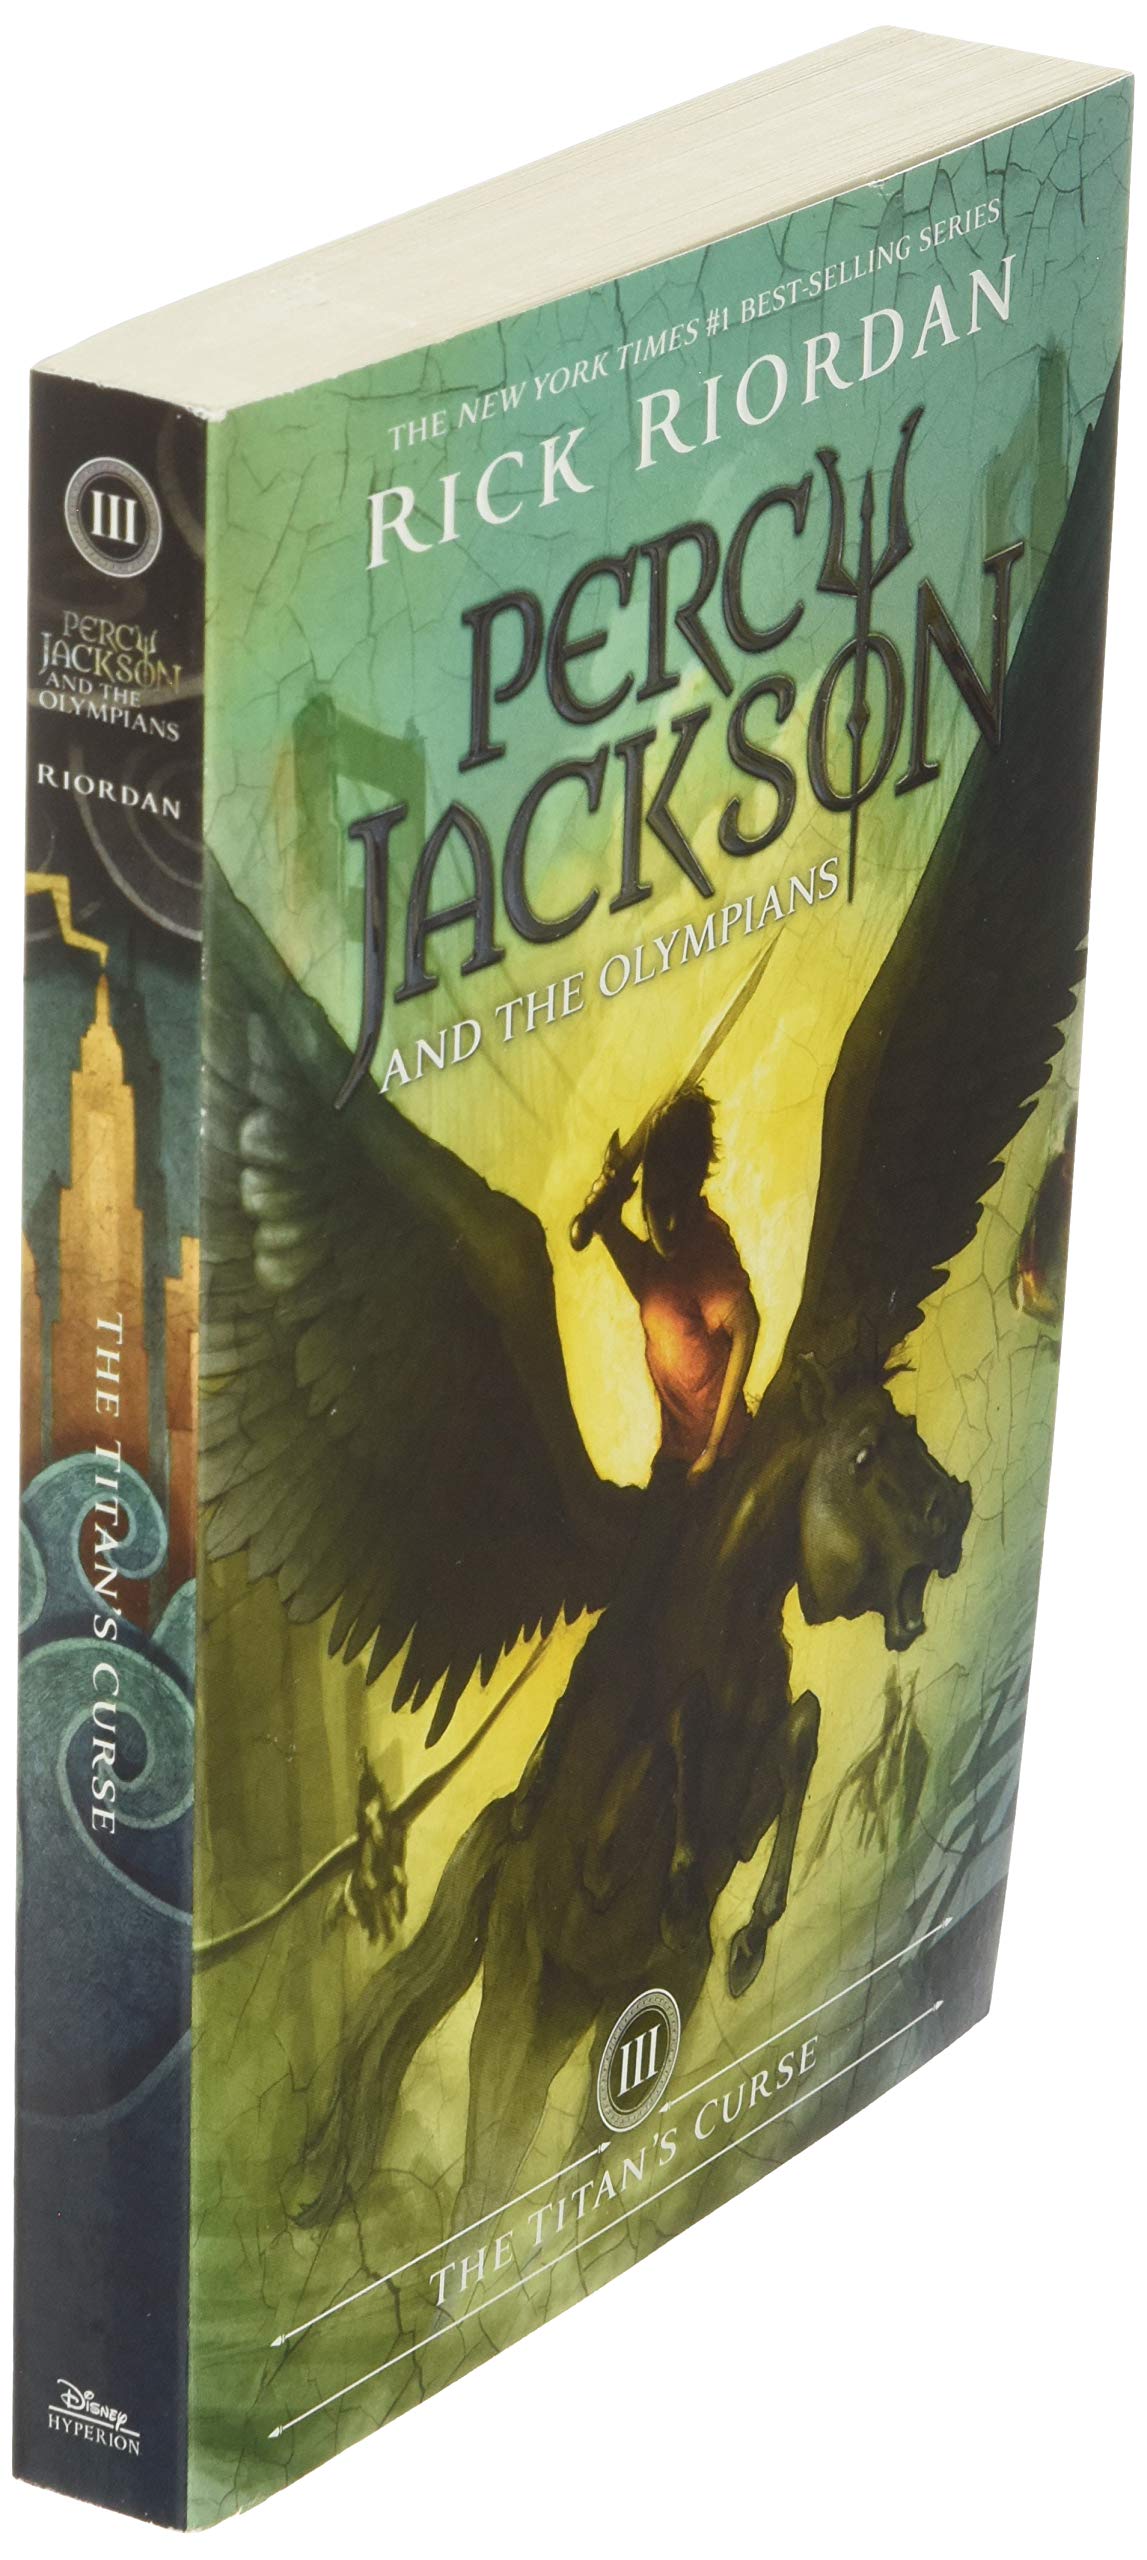 The Titan's Curse (Percy Jackson and the Olympians, Book 3)